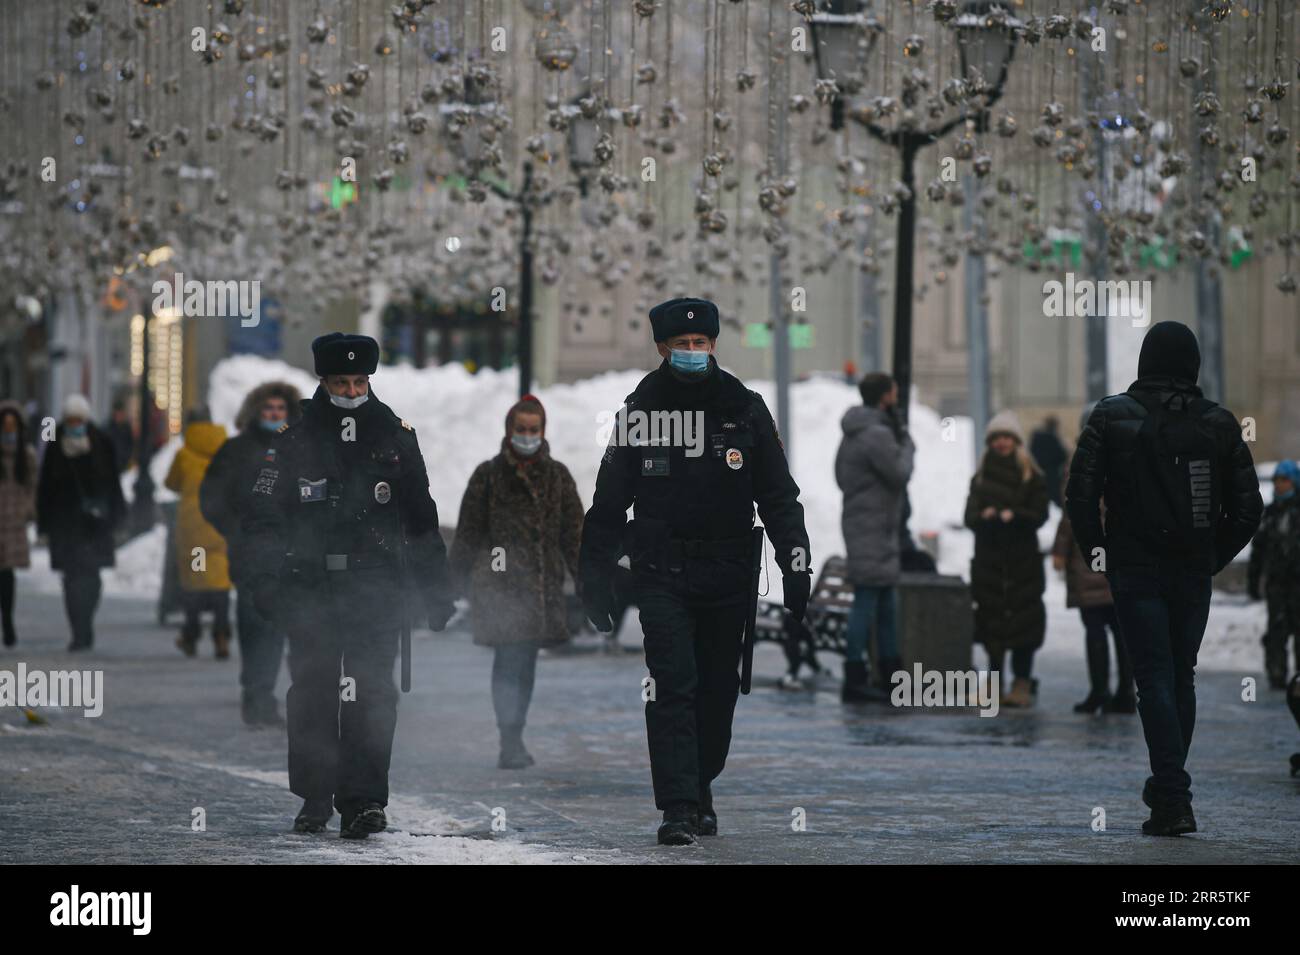 210115 -- MOSCOW, Jan. 15, 2021 -- Policemen wearing face masks patrol on a street in Moscow, Russia, on Jan. 15, 2021. Russia recorded 24,715 more COVID-19 cases over the past 24 hours, roughly the same as in the previous day, the country s COVID-19 response center said Friday. The national tally has thus increased to 3,520,531 with 64,495 deaths and 2,909,680 recoveries, the center said.  RUSSIA-MOSCOW-COVID-19-CASES EvgenyxSinitsyn PUBLICATIONxNOTxINxCHN Stock Photo